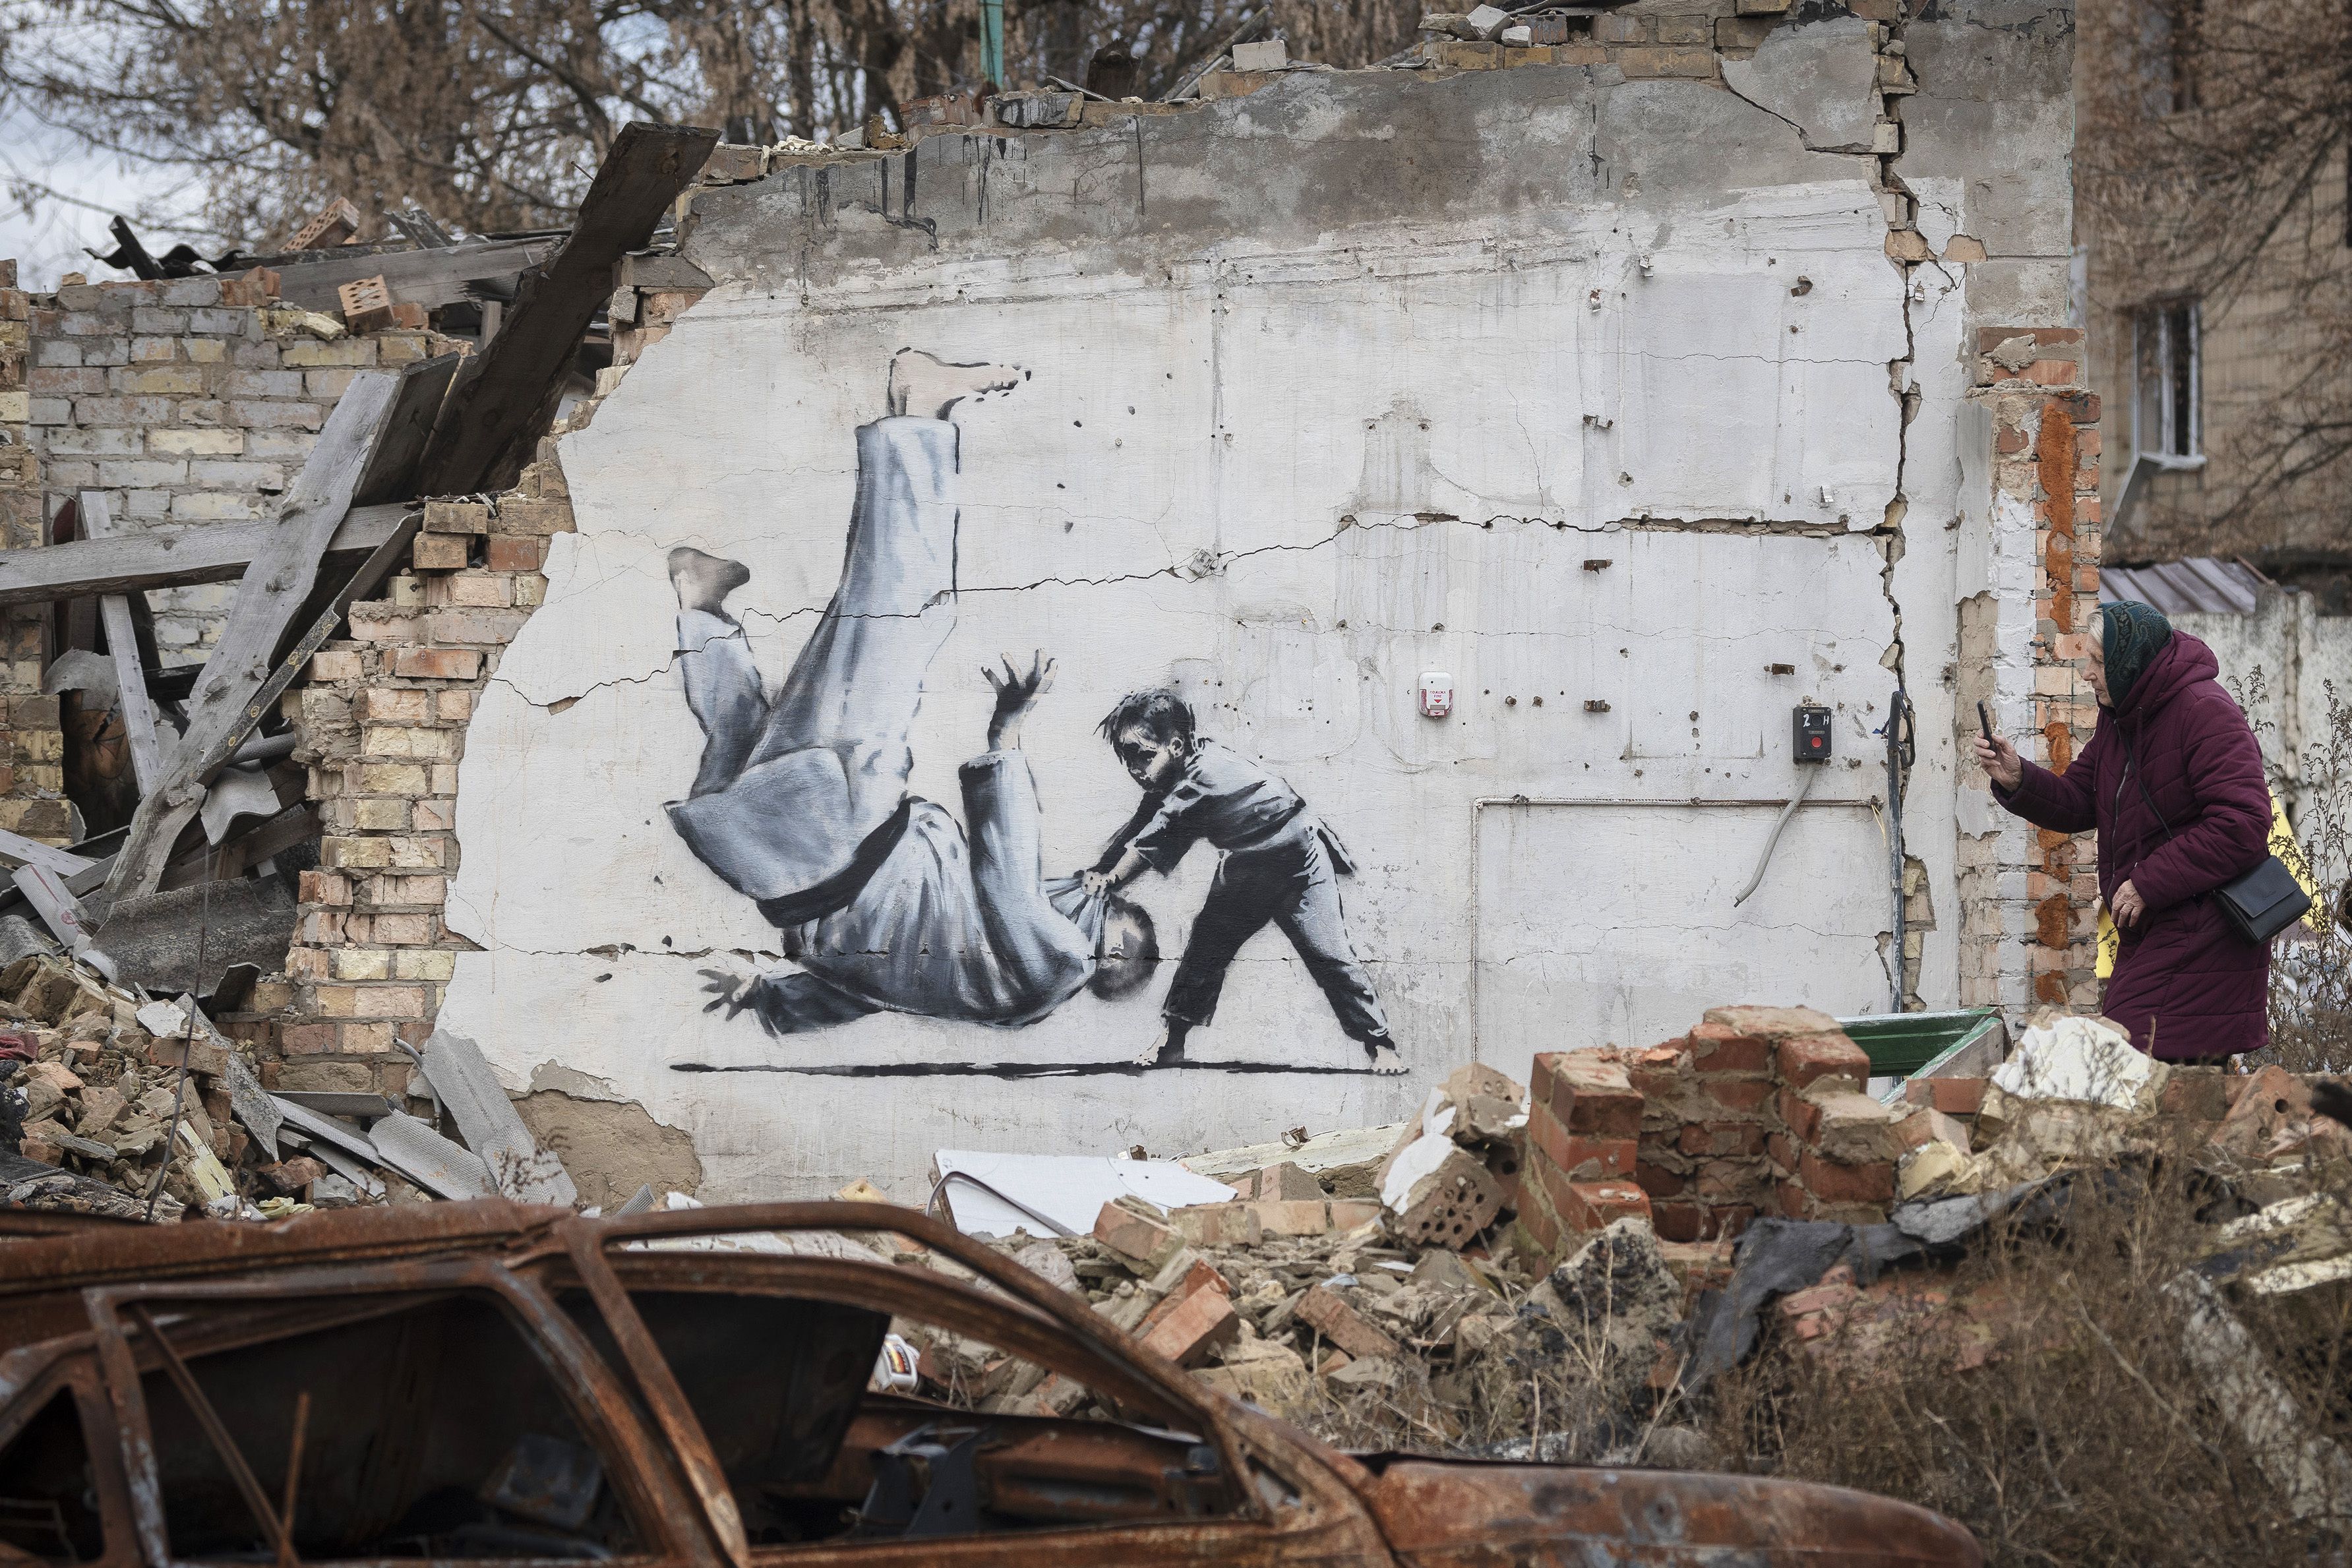 uncovered banksy interview sheds light on name and early career